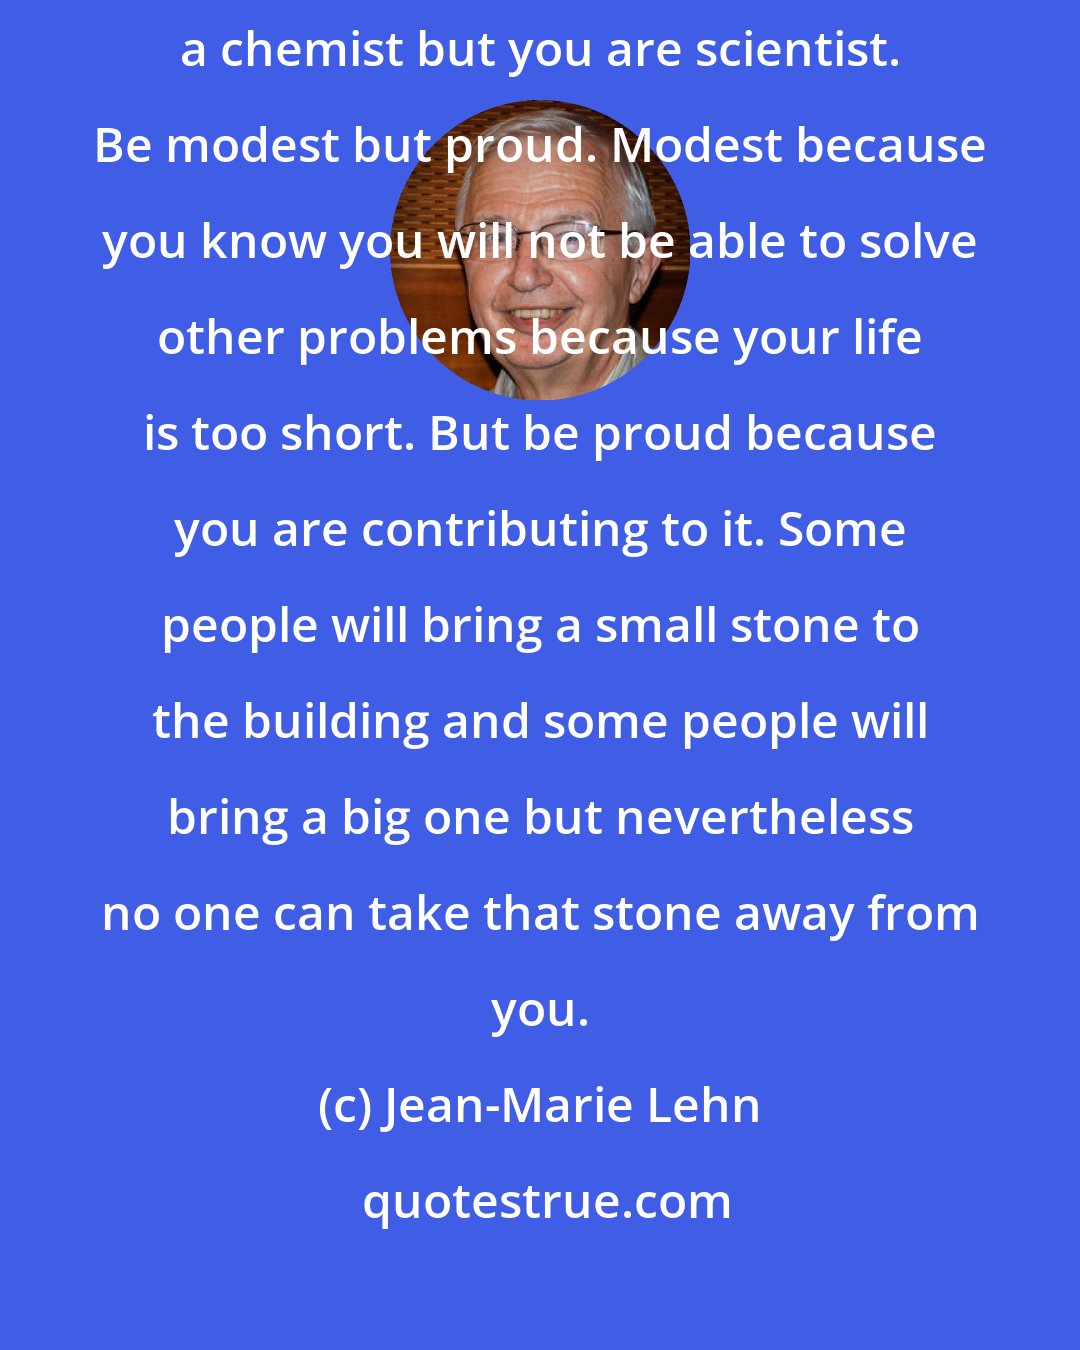 Jean-Marie Lehn: Think that you are part of a big construction called science and you are not just a chemist but you are scientist. Be modest but proud. Modest because you know you will not be able to solve other problems because your life is too short. But be proud because you are contributing to it. Some people will bring a small stone to the building and some people will bring a big one but nevertheless no one can take that stone away from you.